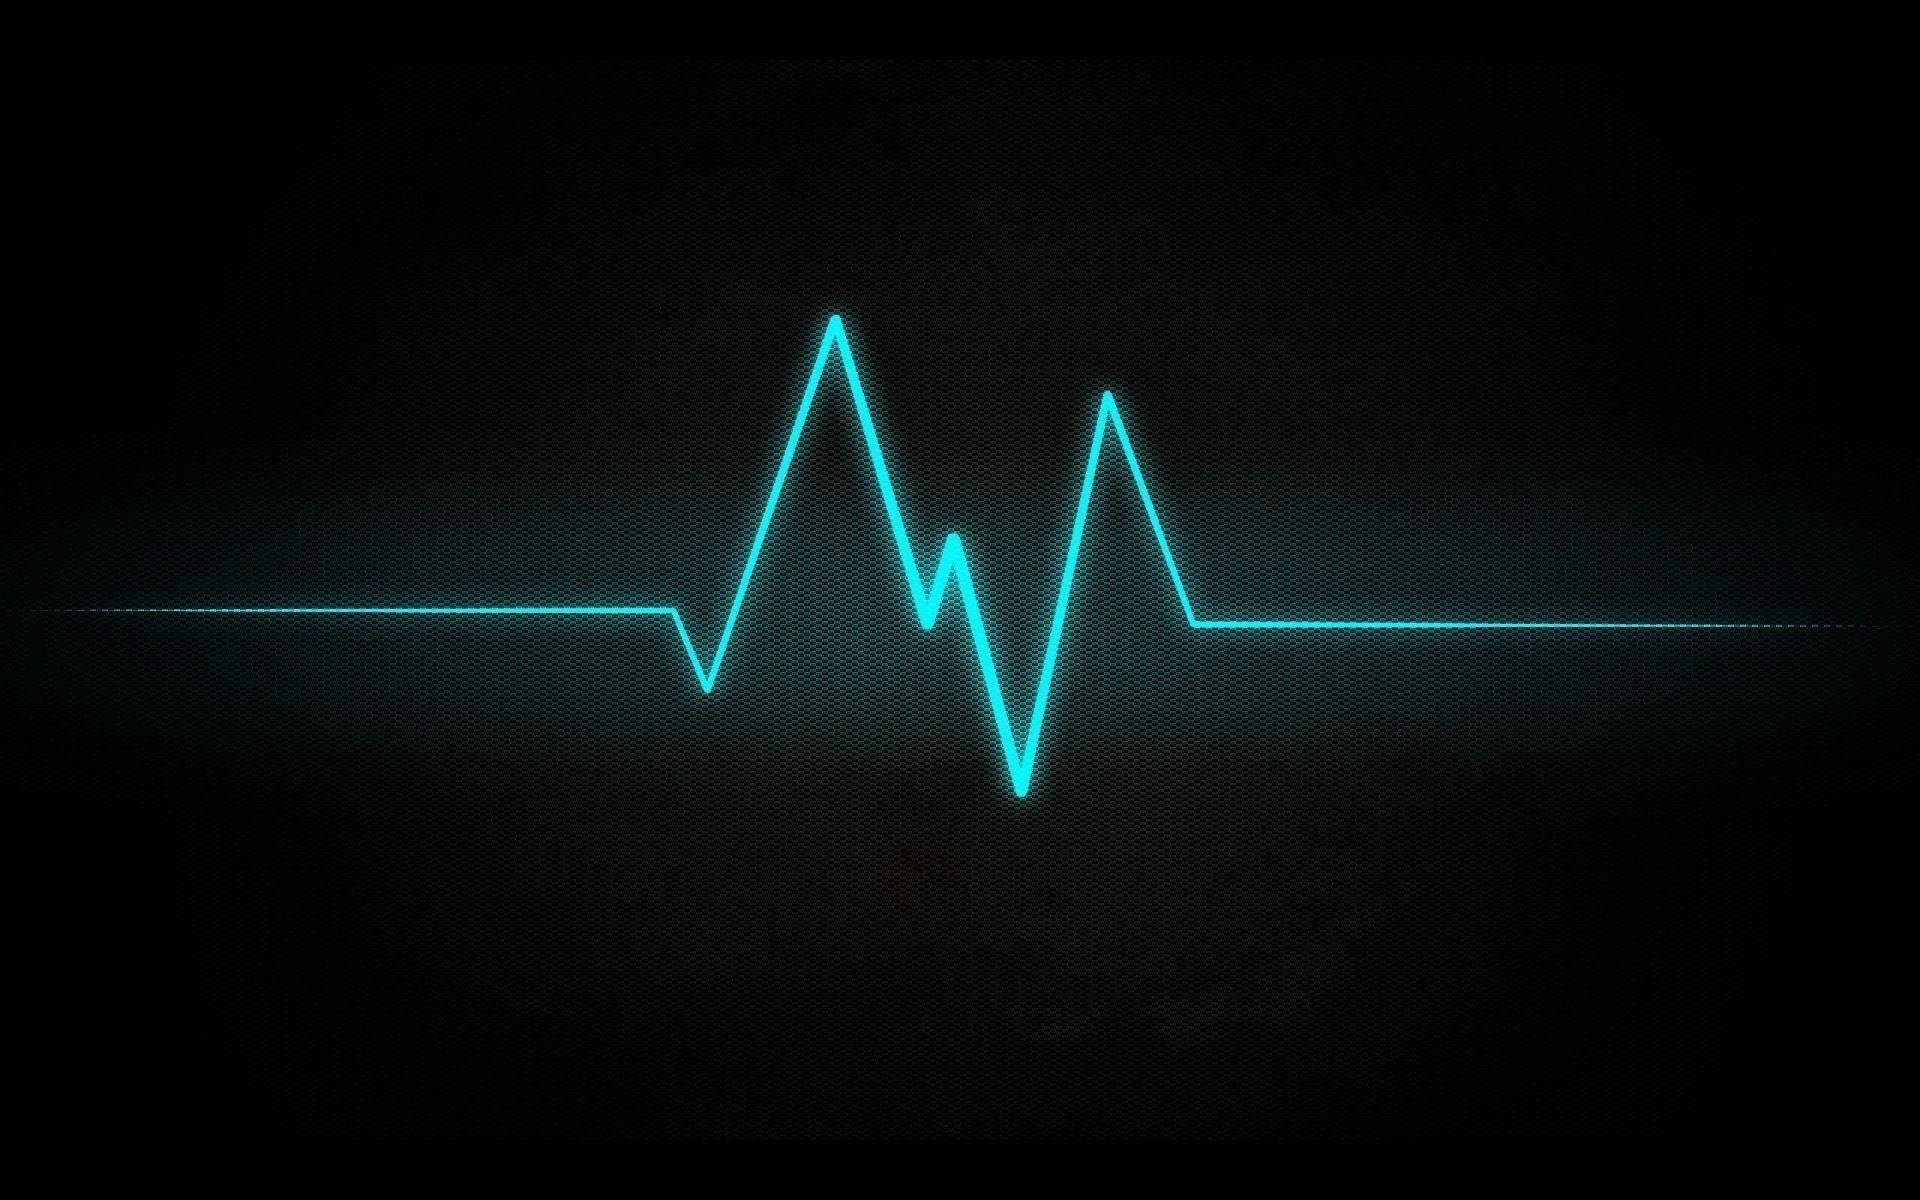 Cool Dark With Blue Lit Heartbeat Line Background